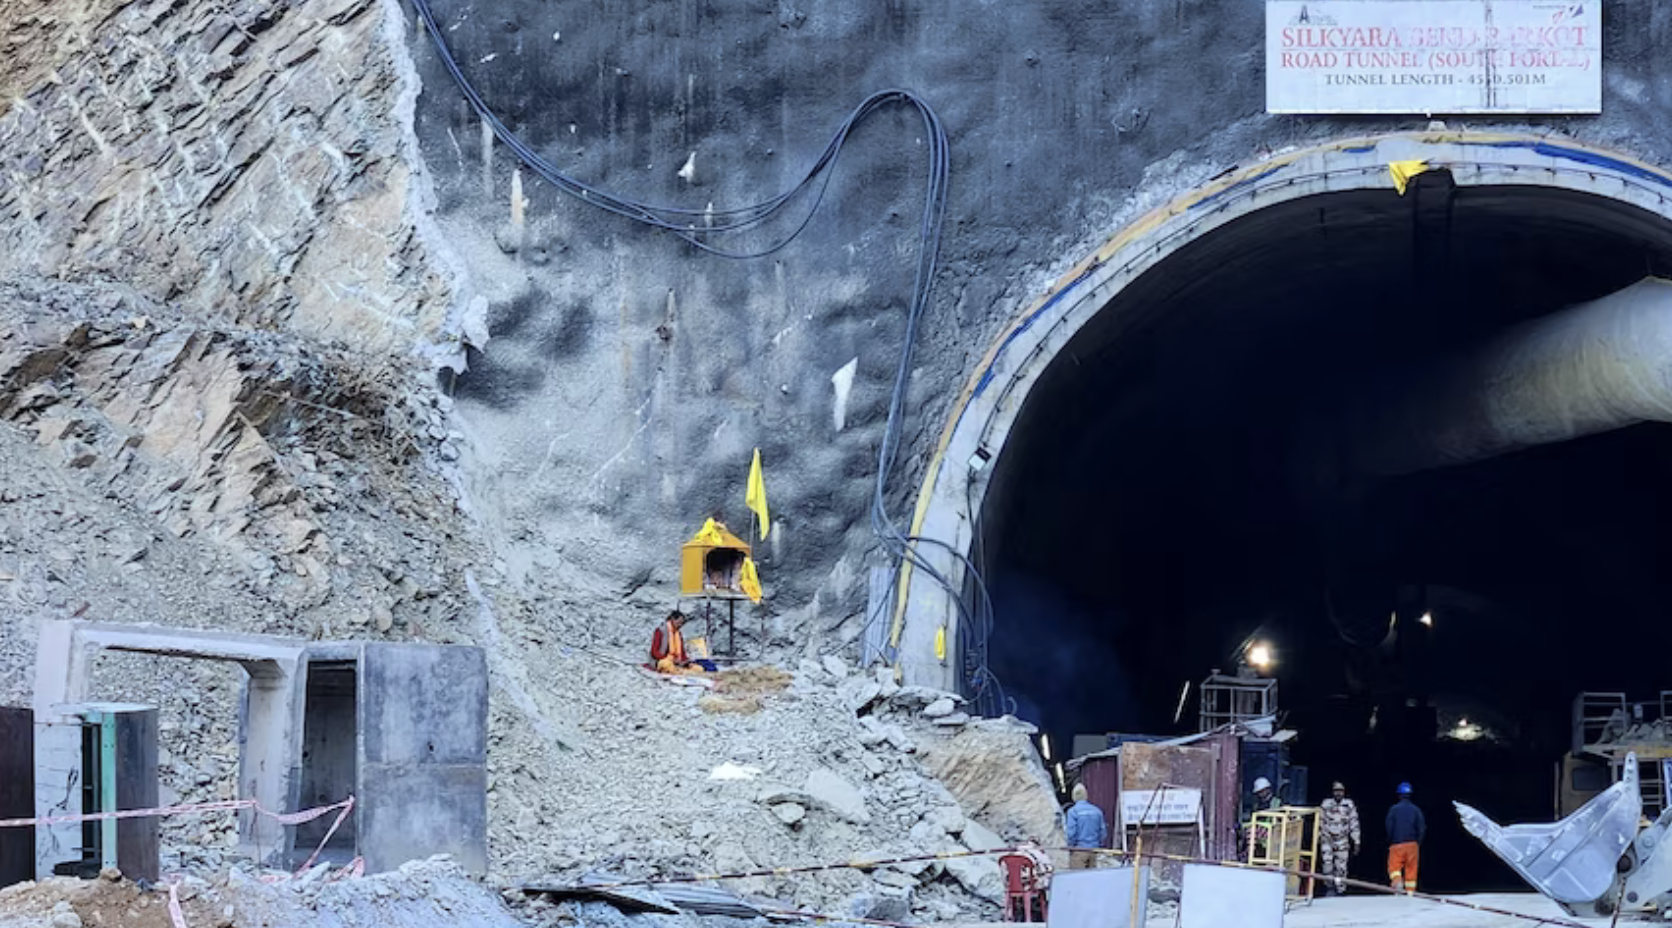 First Footage Emerges of Trapped Indian Workers in Himalayan Tunnel, Rescue Efforts Intensify